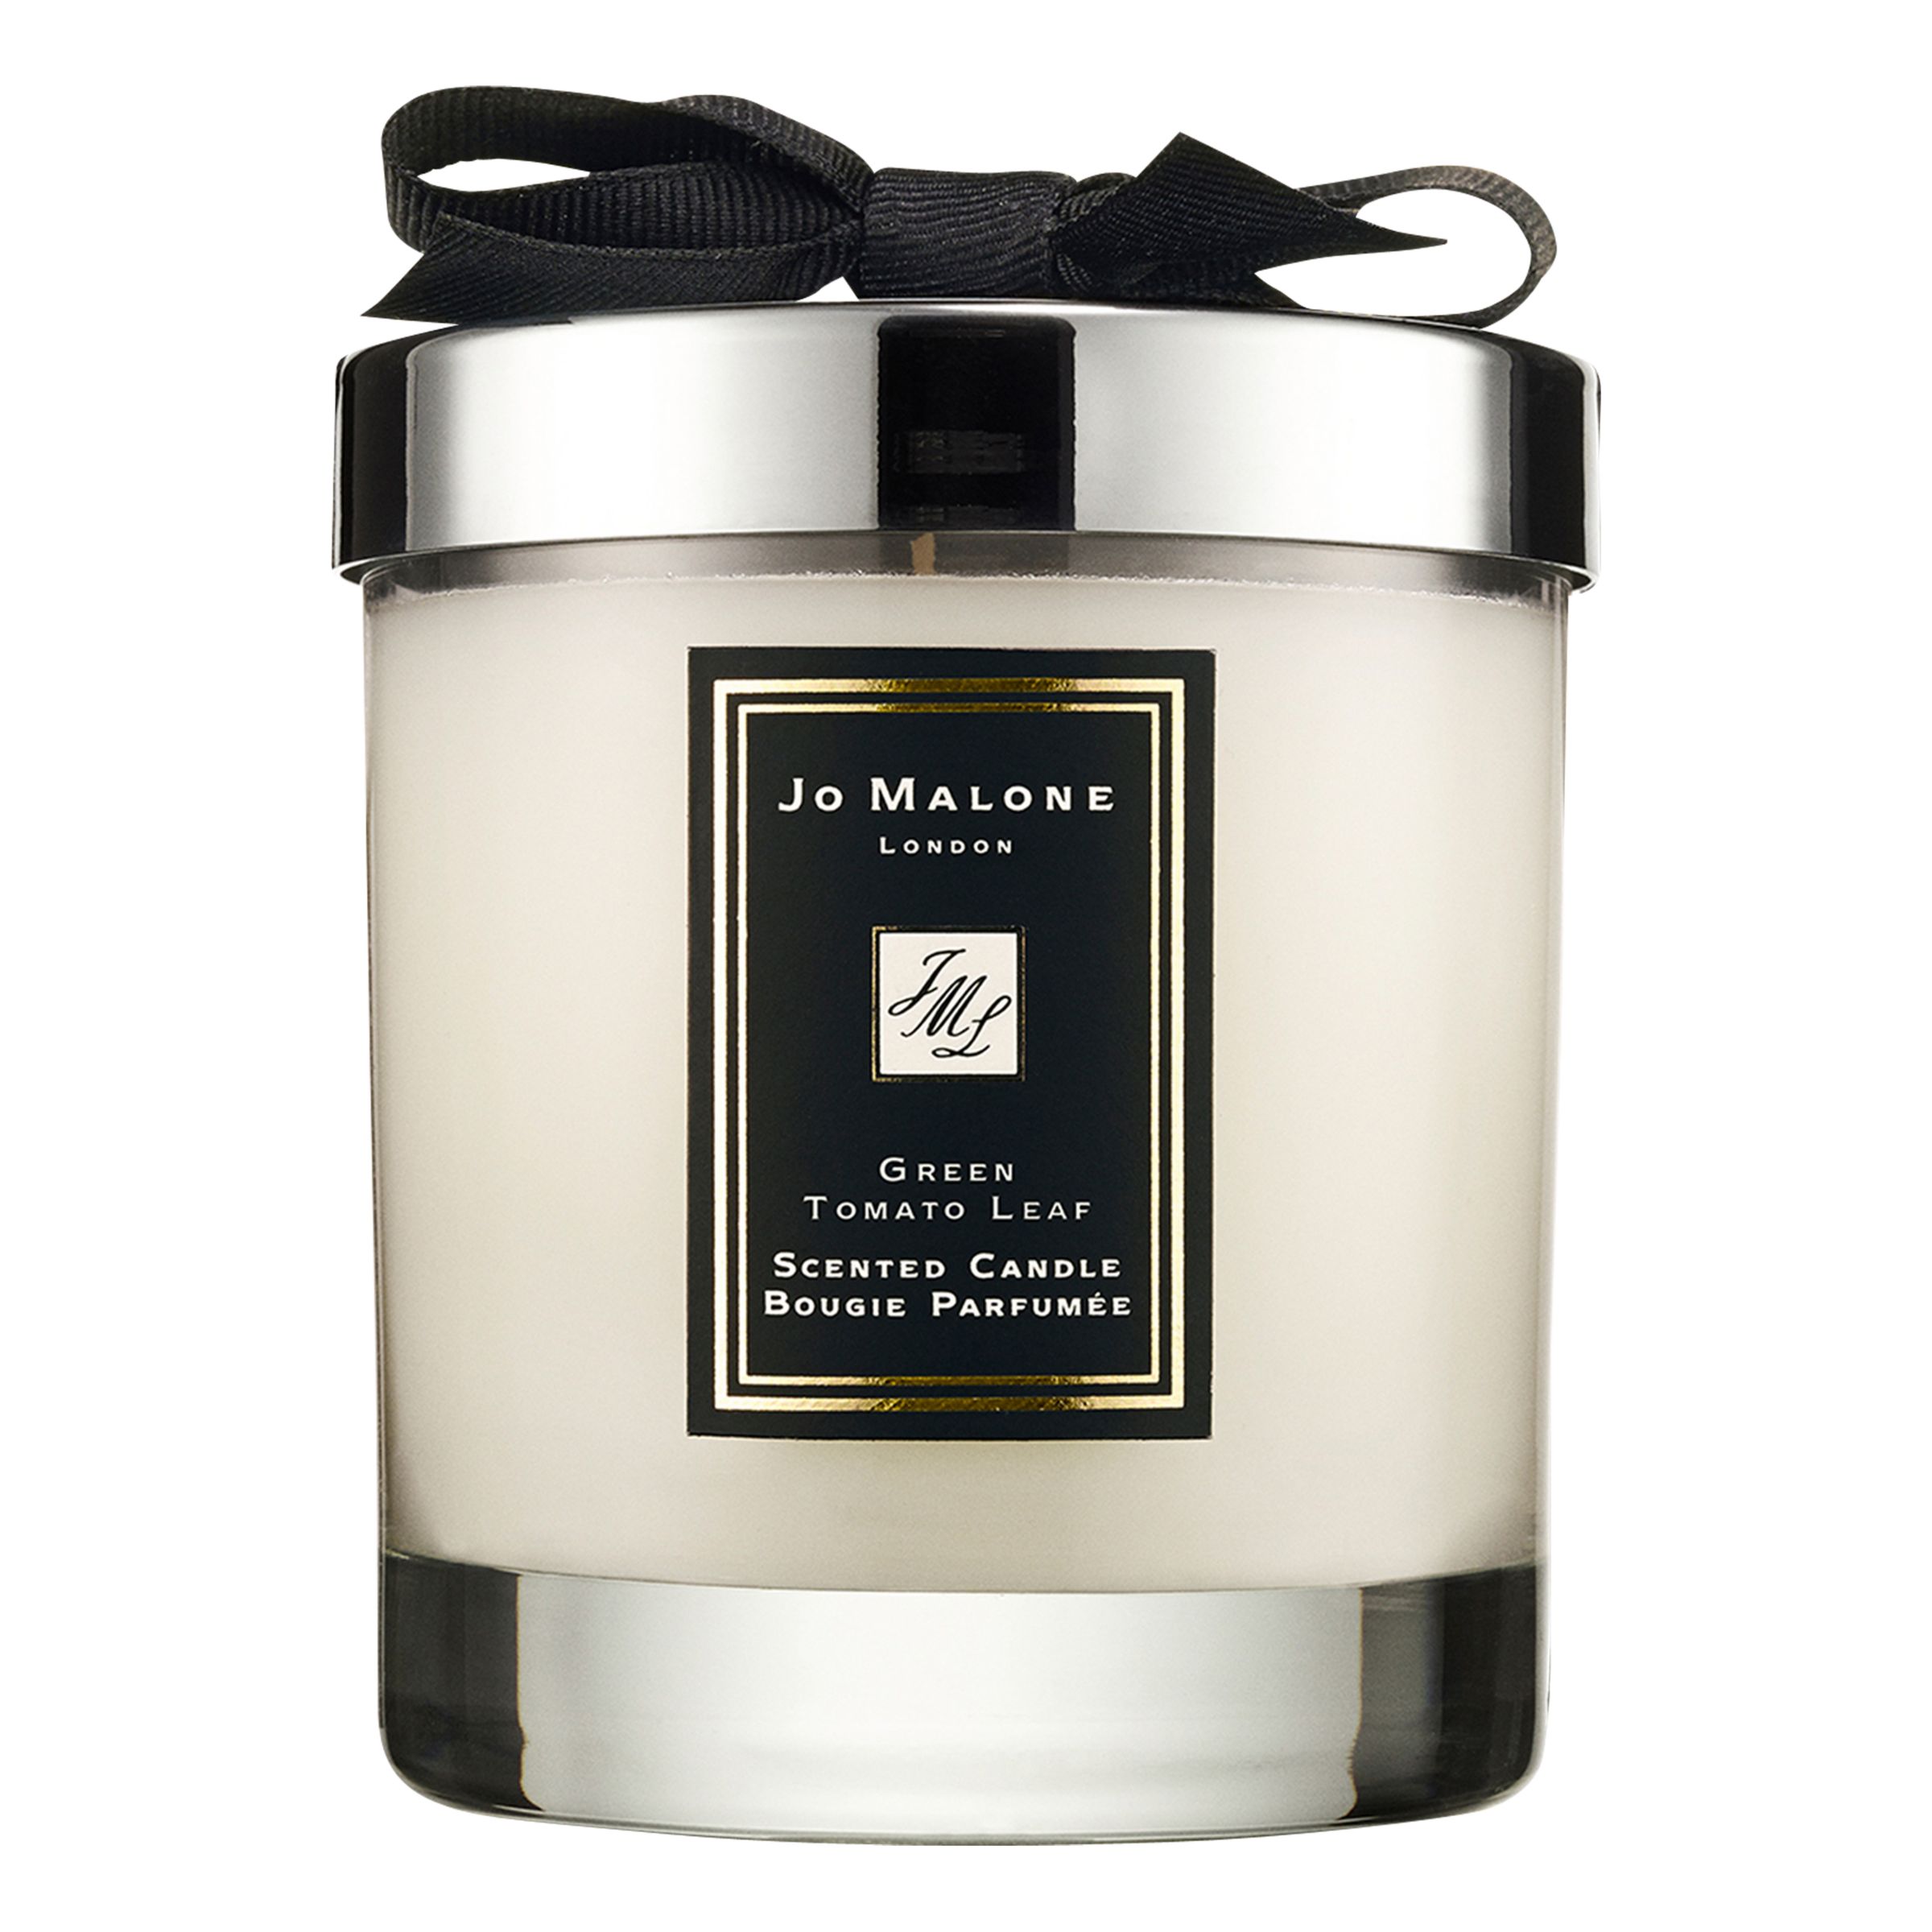 Jo Malone London Green Tomato Leaf Scented Candle, 200g